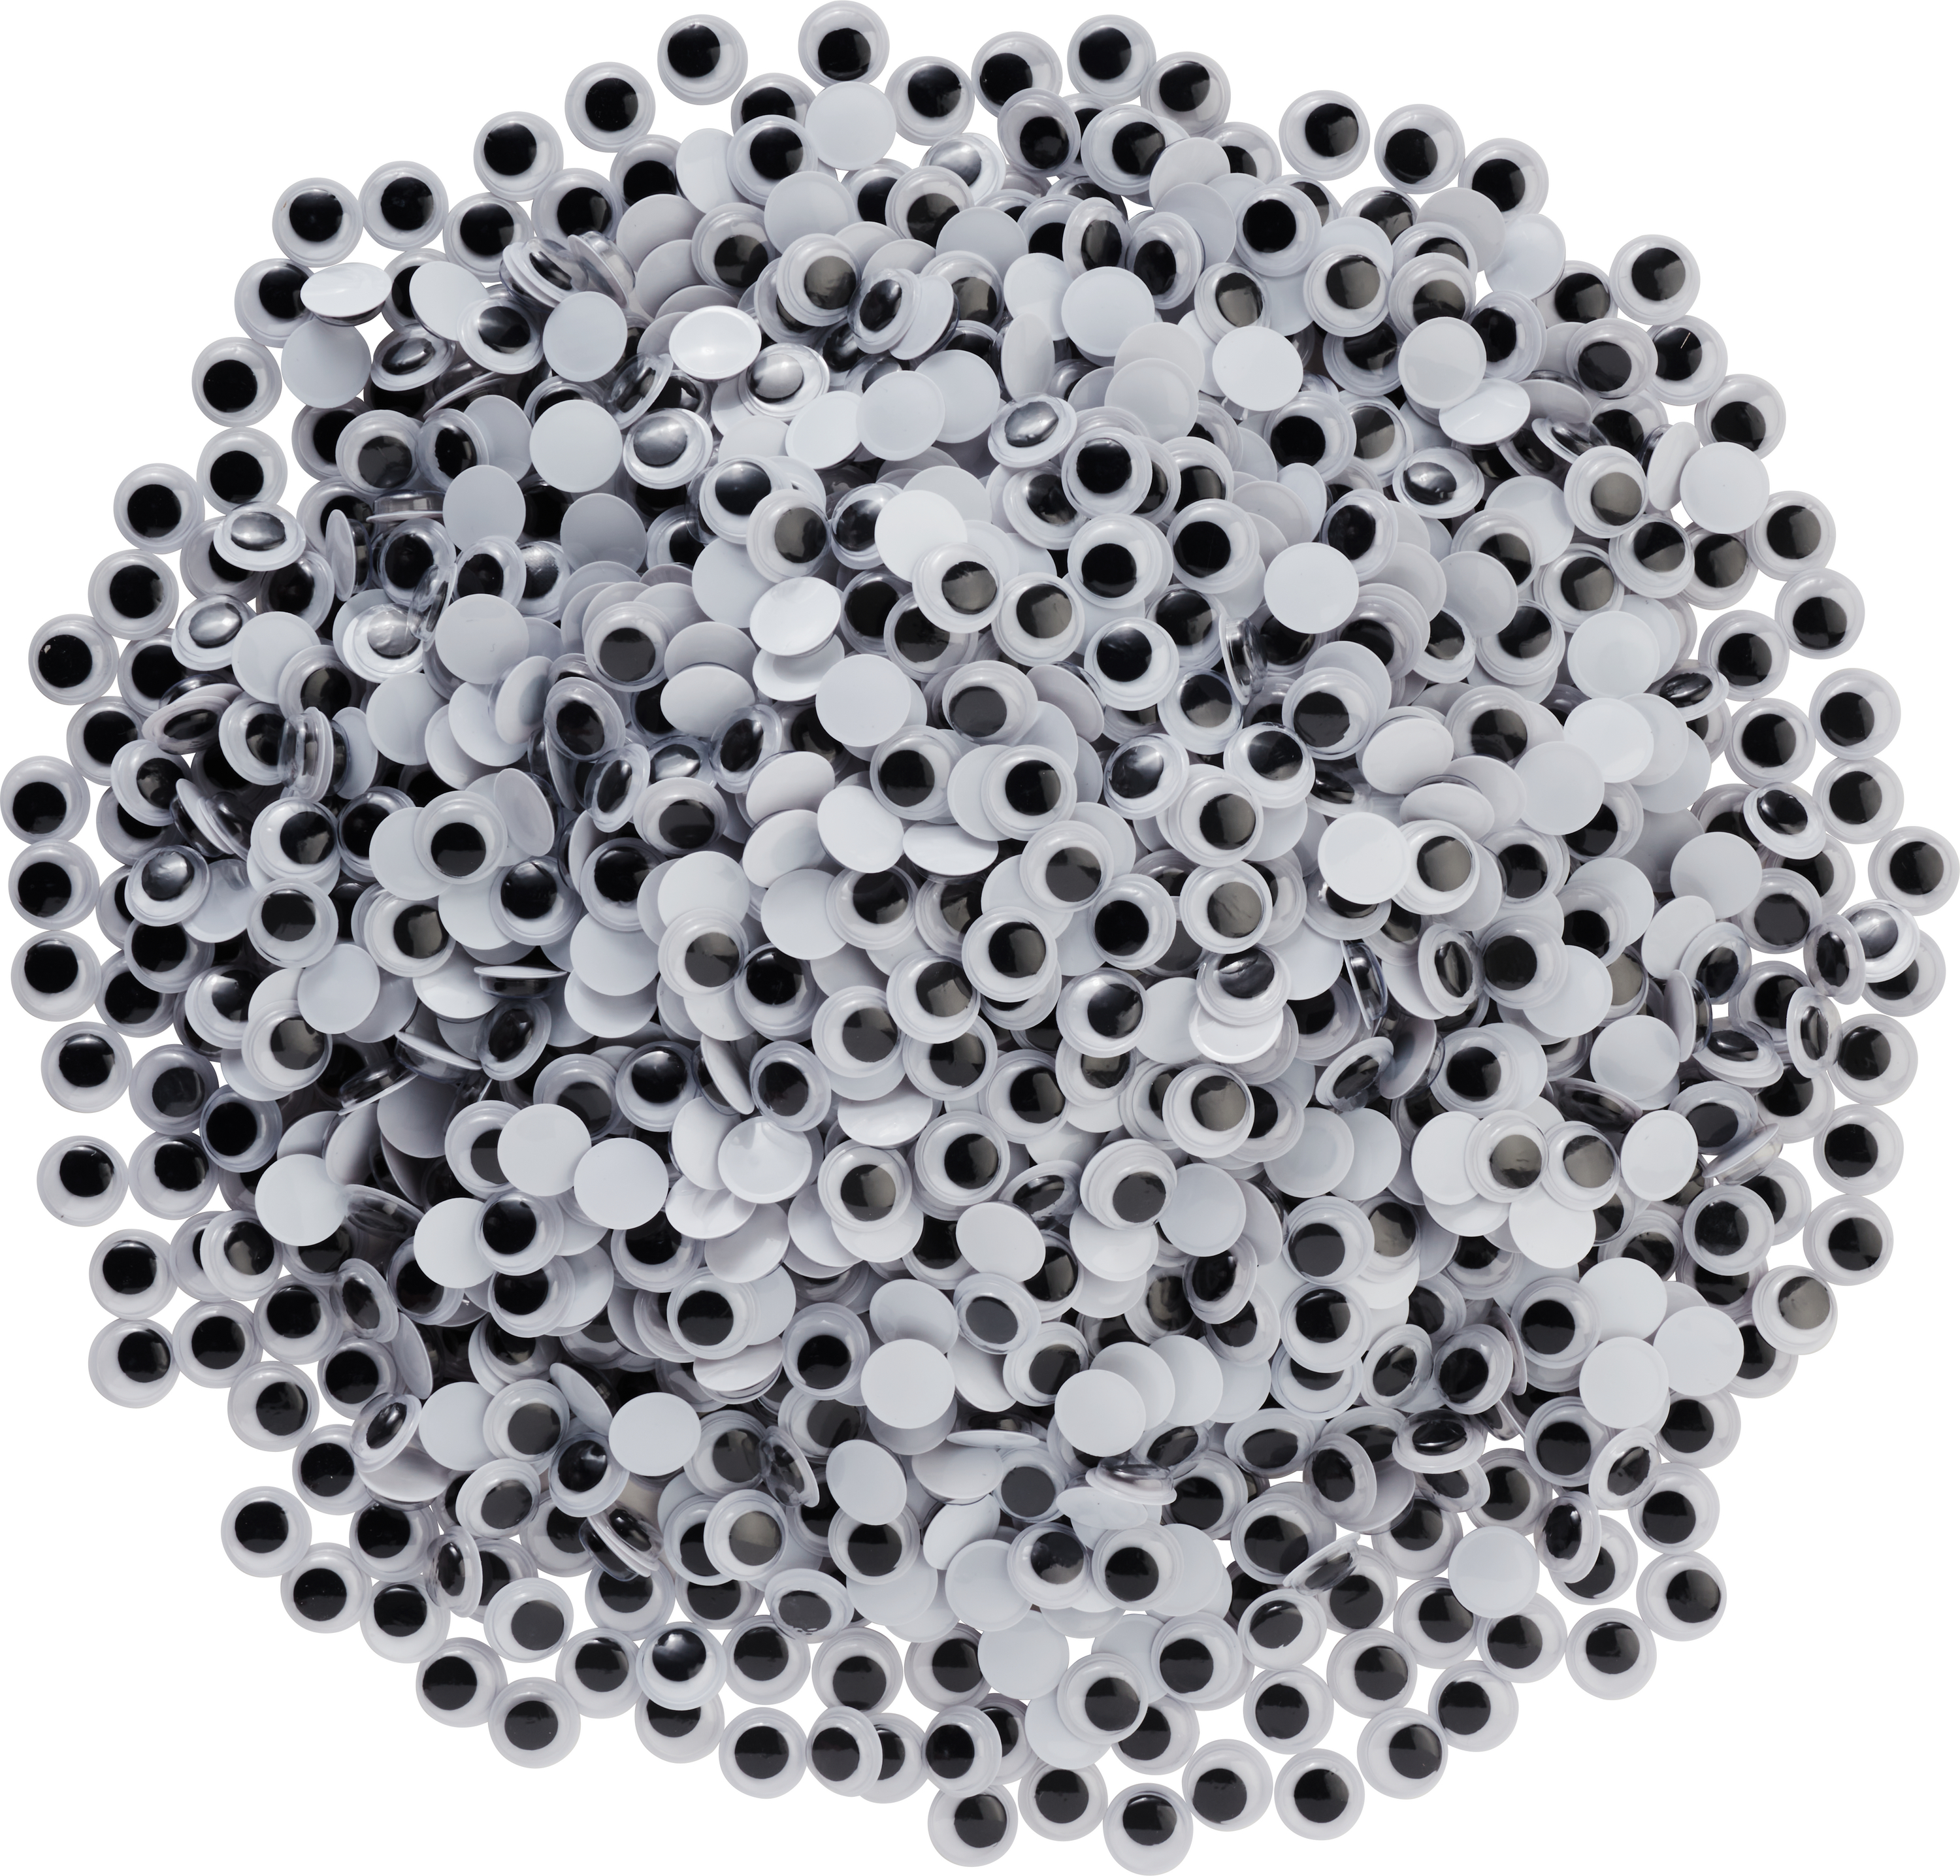 400 Pearls for Clothing Decoration Mix Size Include 200 Rivets for Fabric  and